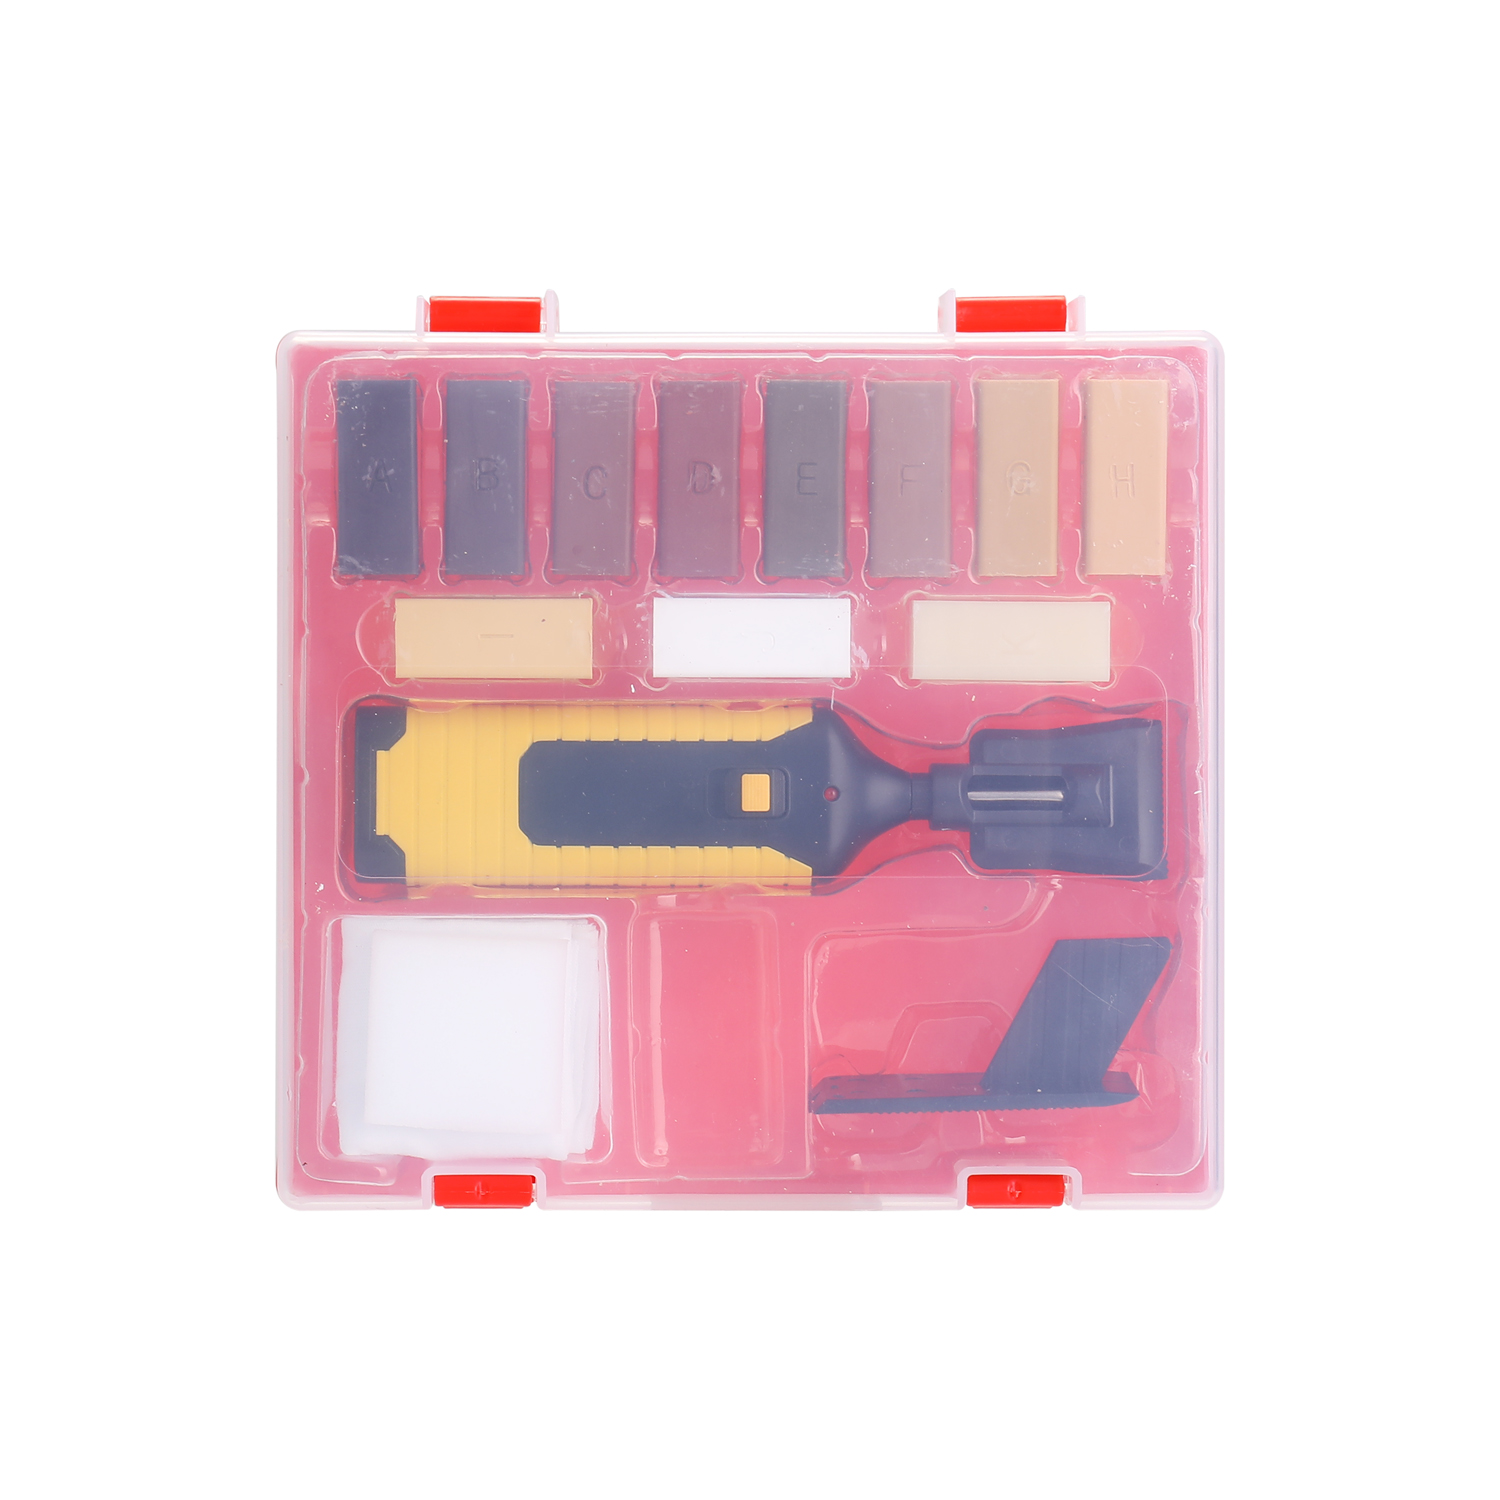 Find Wooden Floor Furniture Repair Set Household DIY Repair Kit for Sale on Gipsybee.com with cryptocurrencies